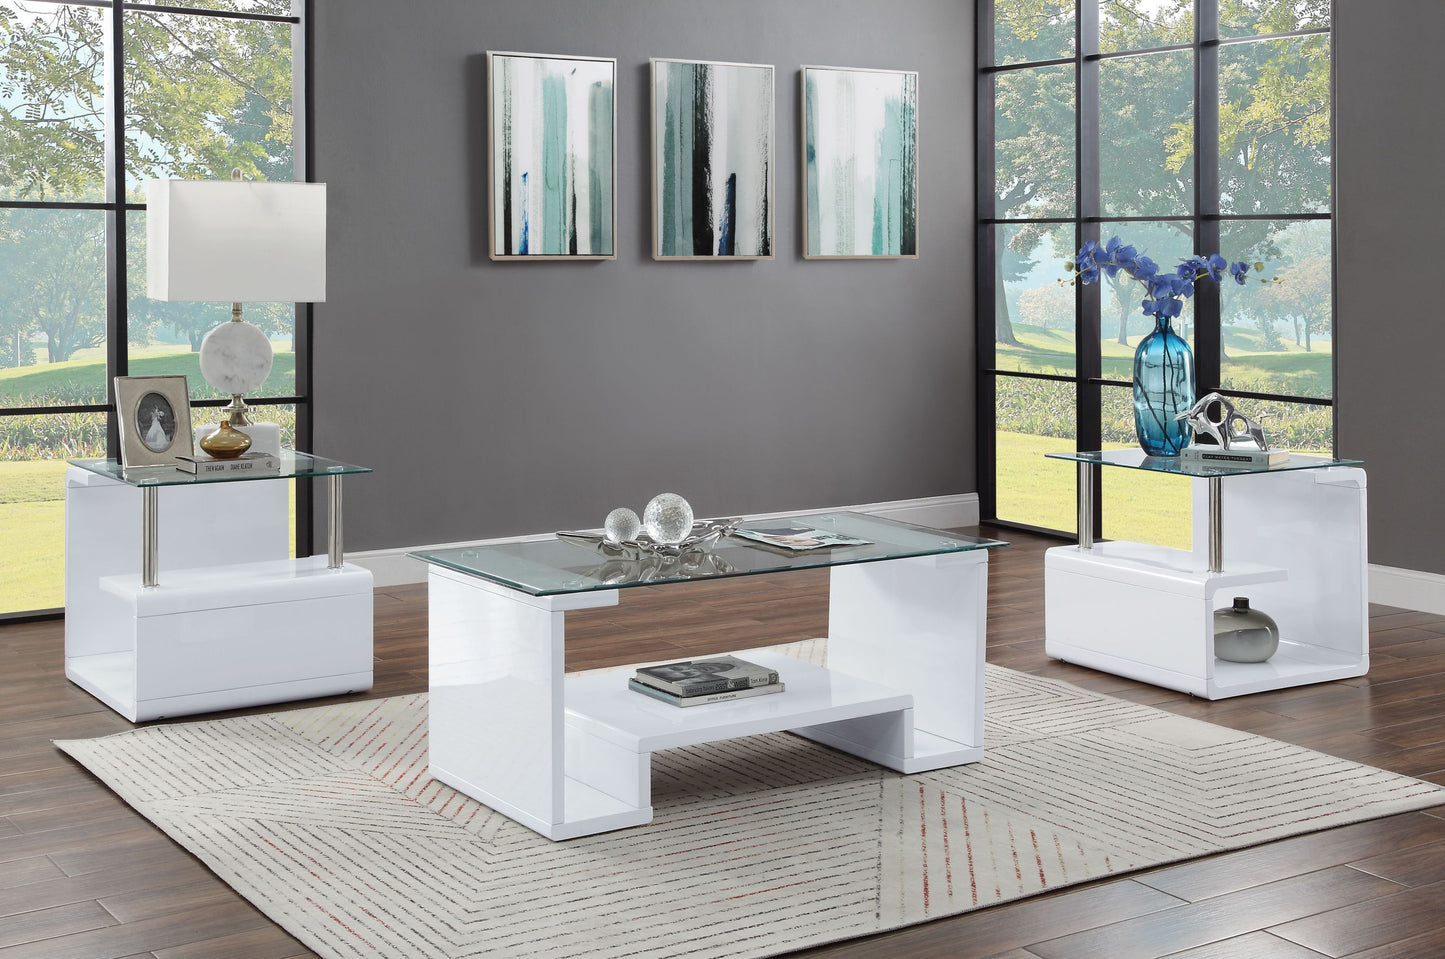 Nevaeh Glass and White High Gloss Coffee Table with Storage Shelf